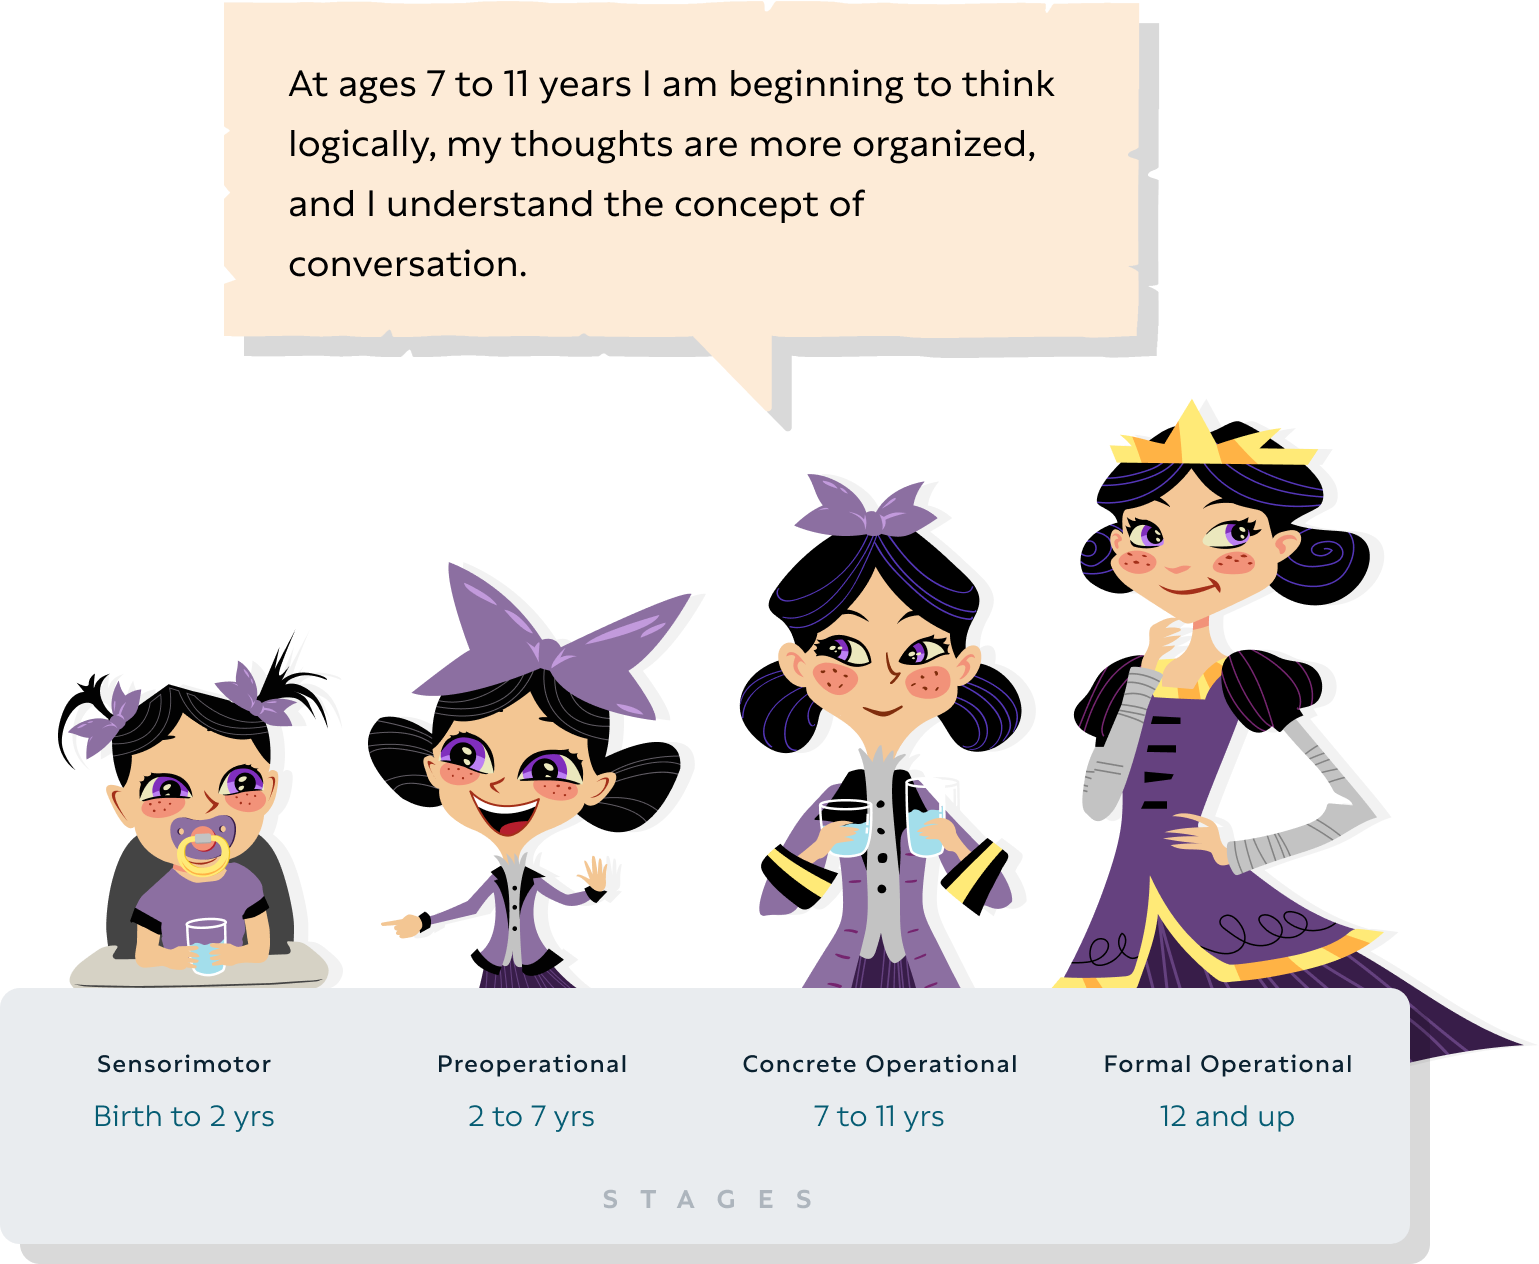 Four characters demonstrate Piaget's stages of cognitive development: sensorimotor, preoperational, concrete operational and formative operational. A word bubble over the "concrete operational stage" says, "At ages 7 to 11 years, I am beginning to think logically, my thoughts are more organized, and I understand the concept of conversation."